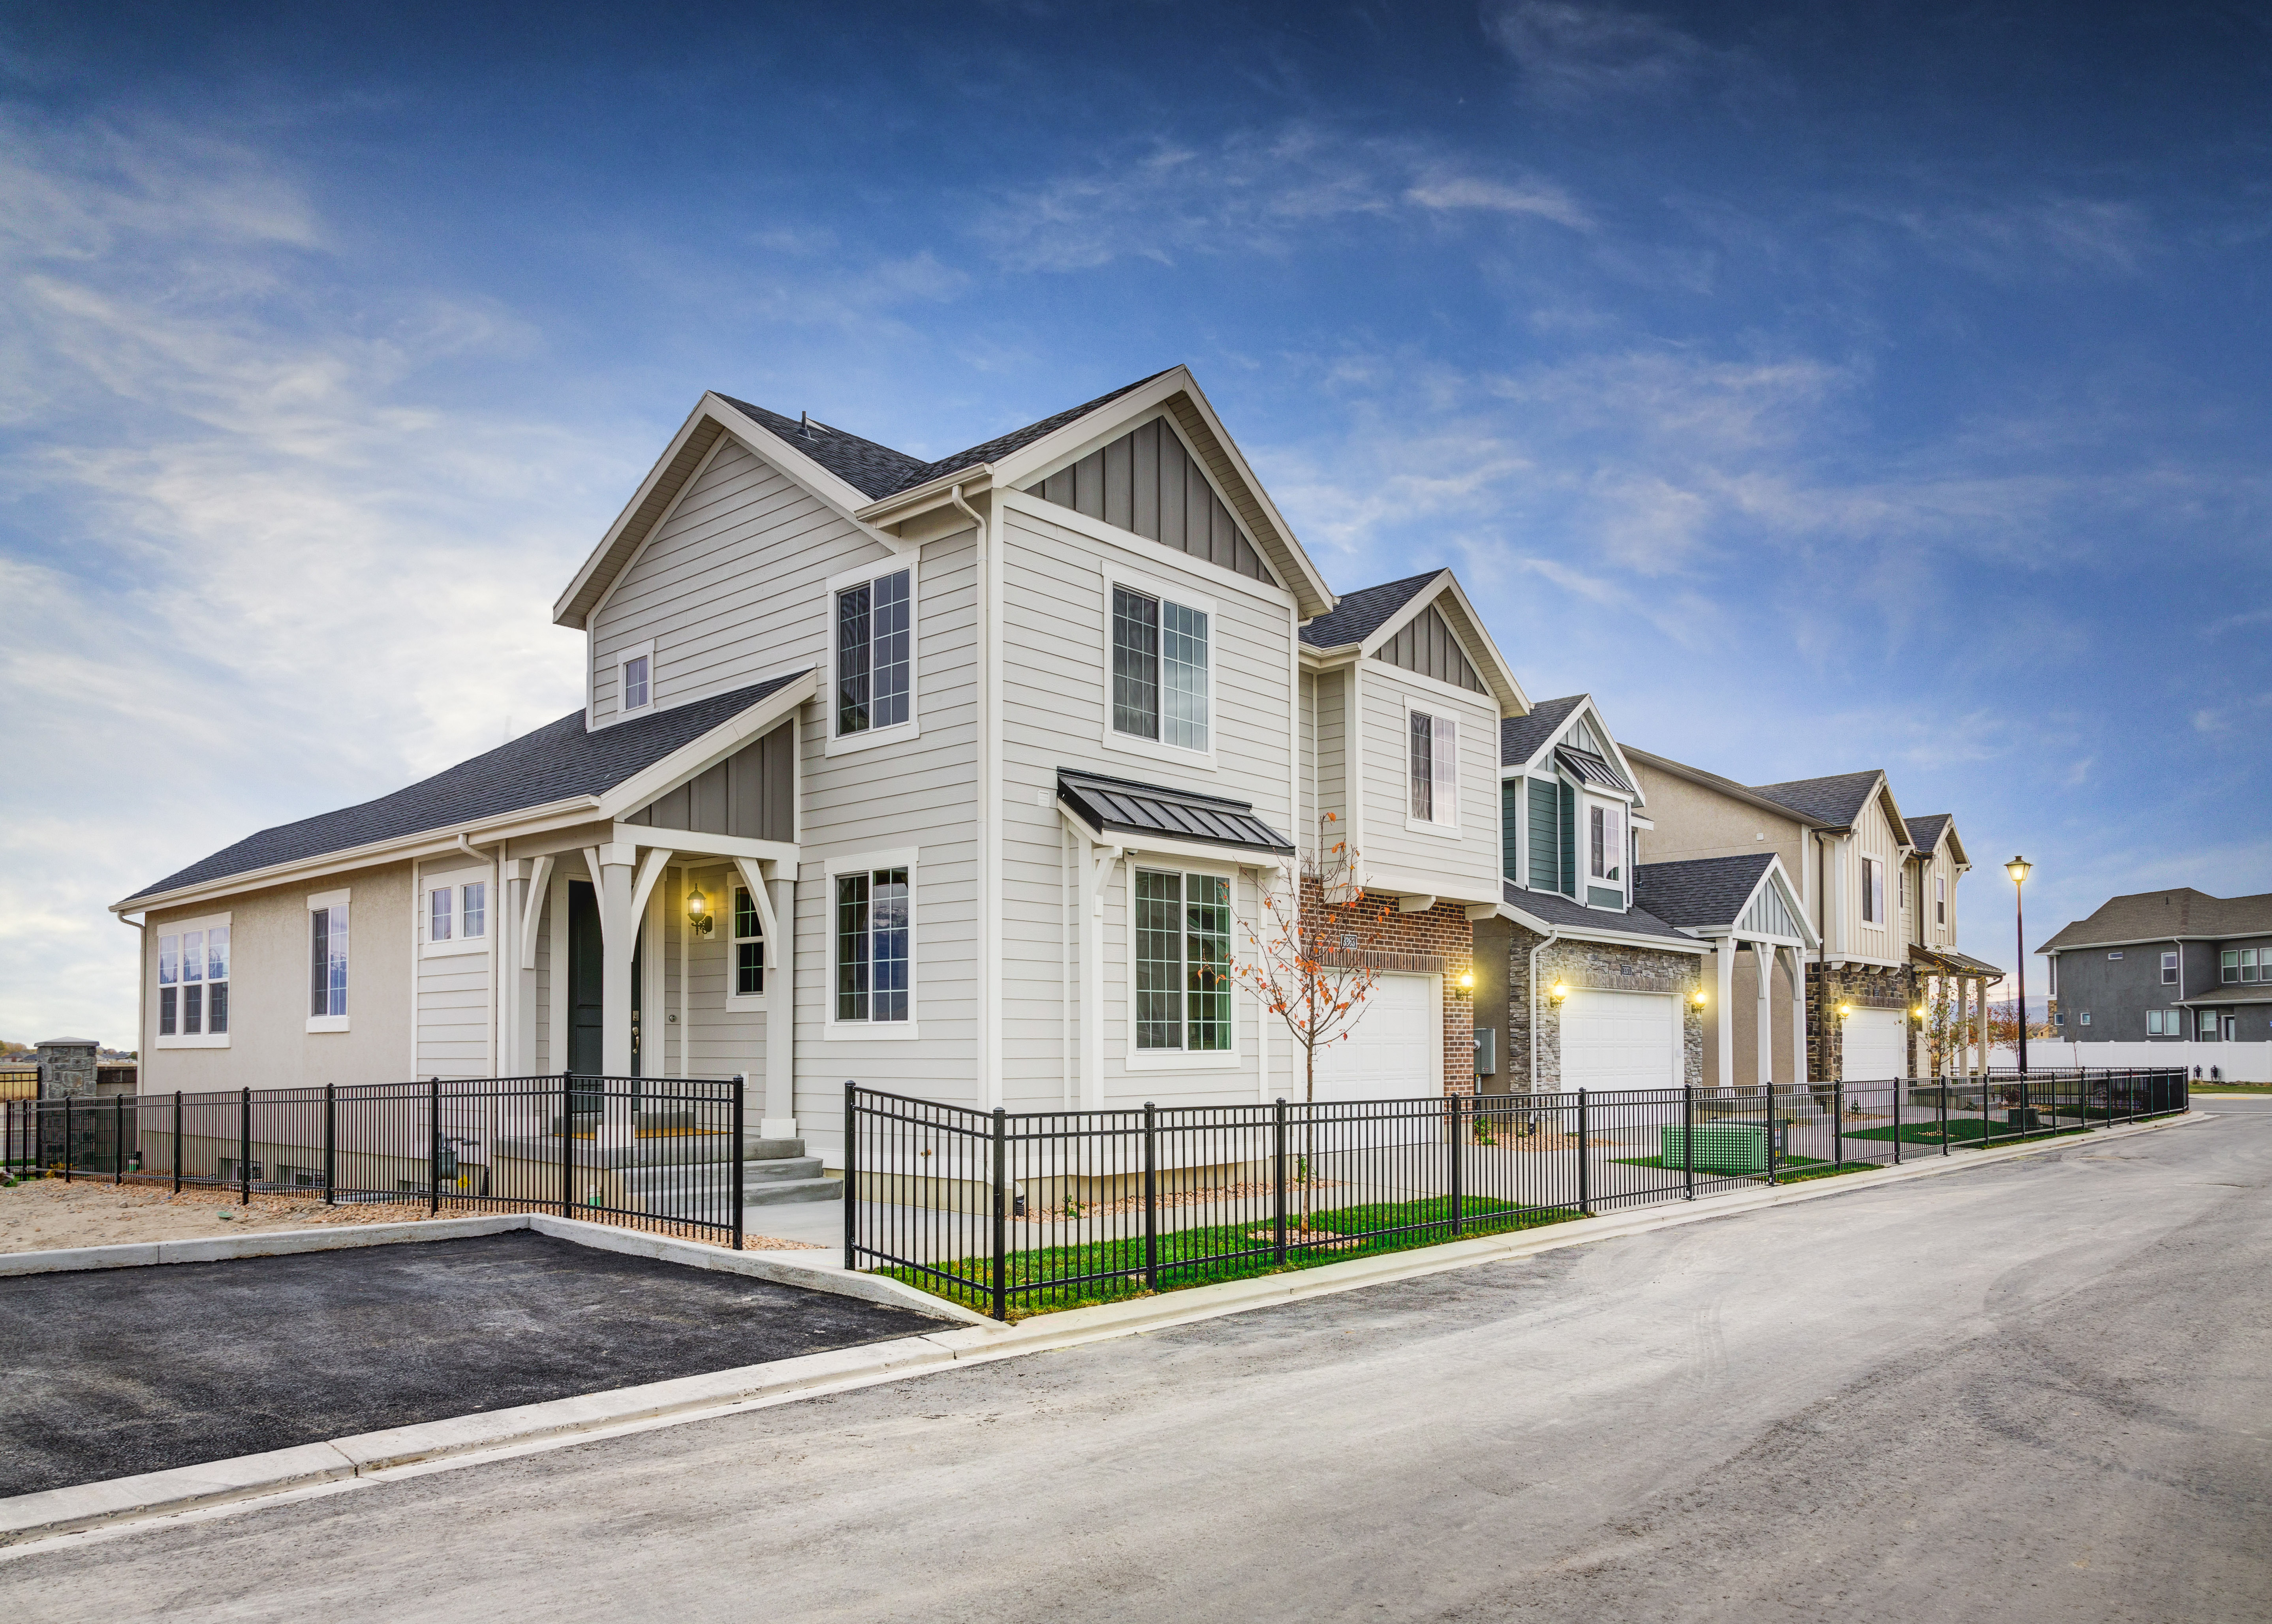 Ivory Homes Pushes for Affordable Housing Starting with Holbrook Cottages in Lehi